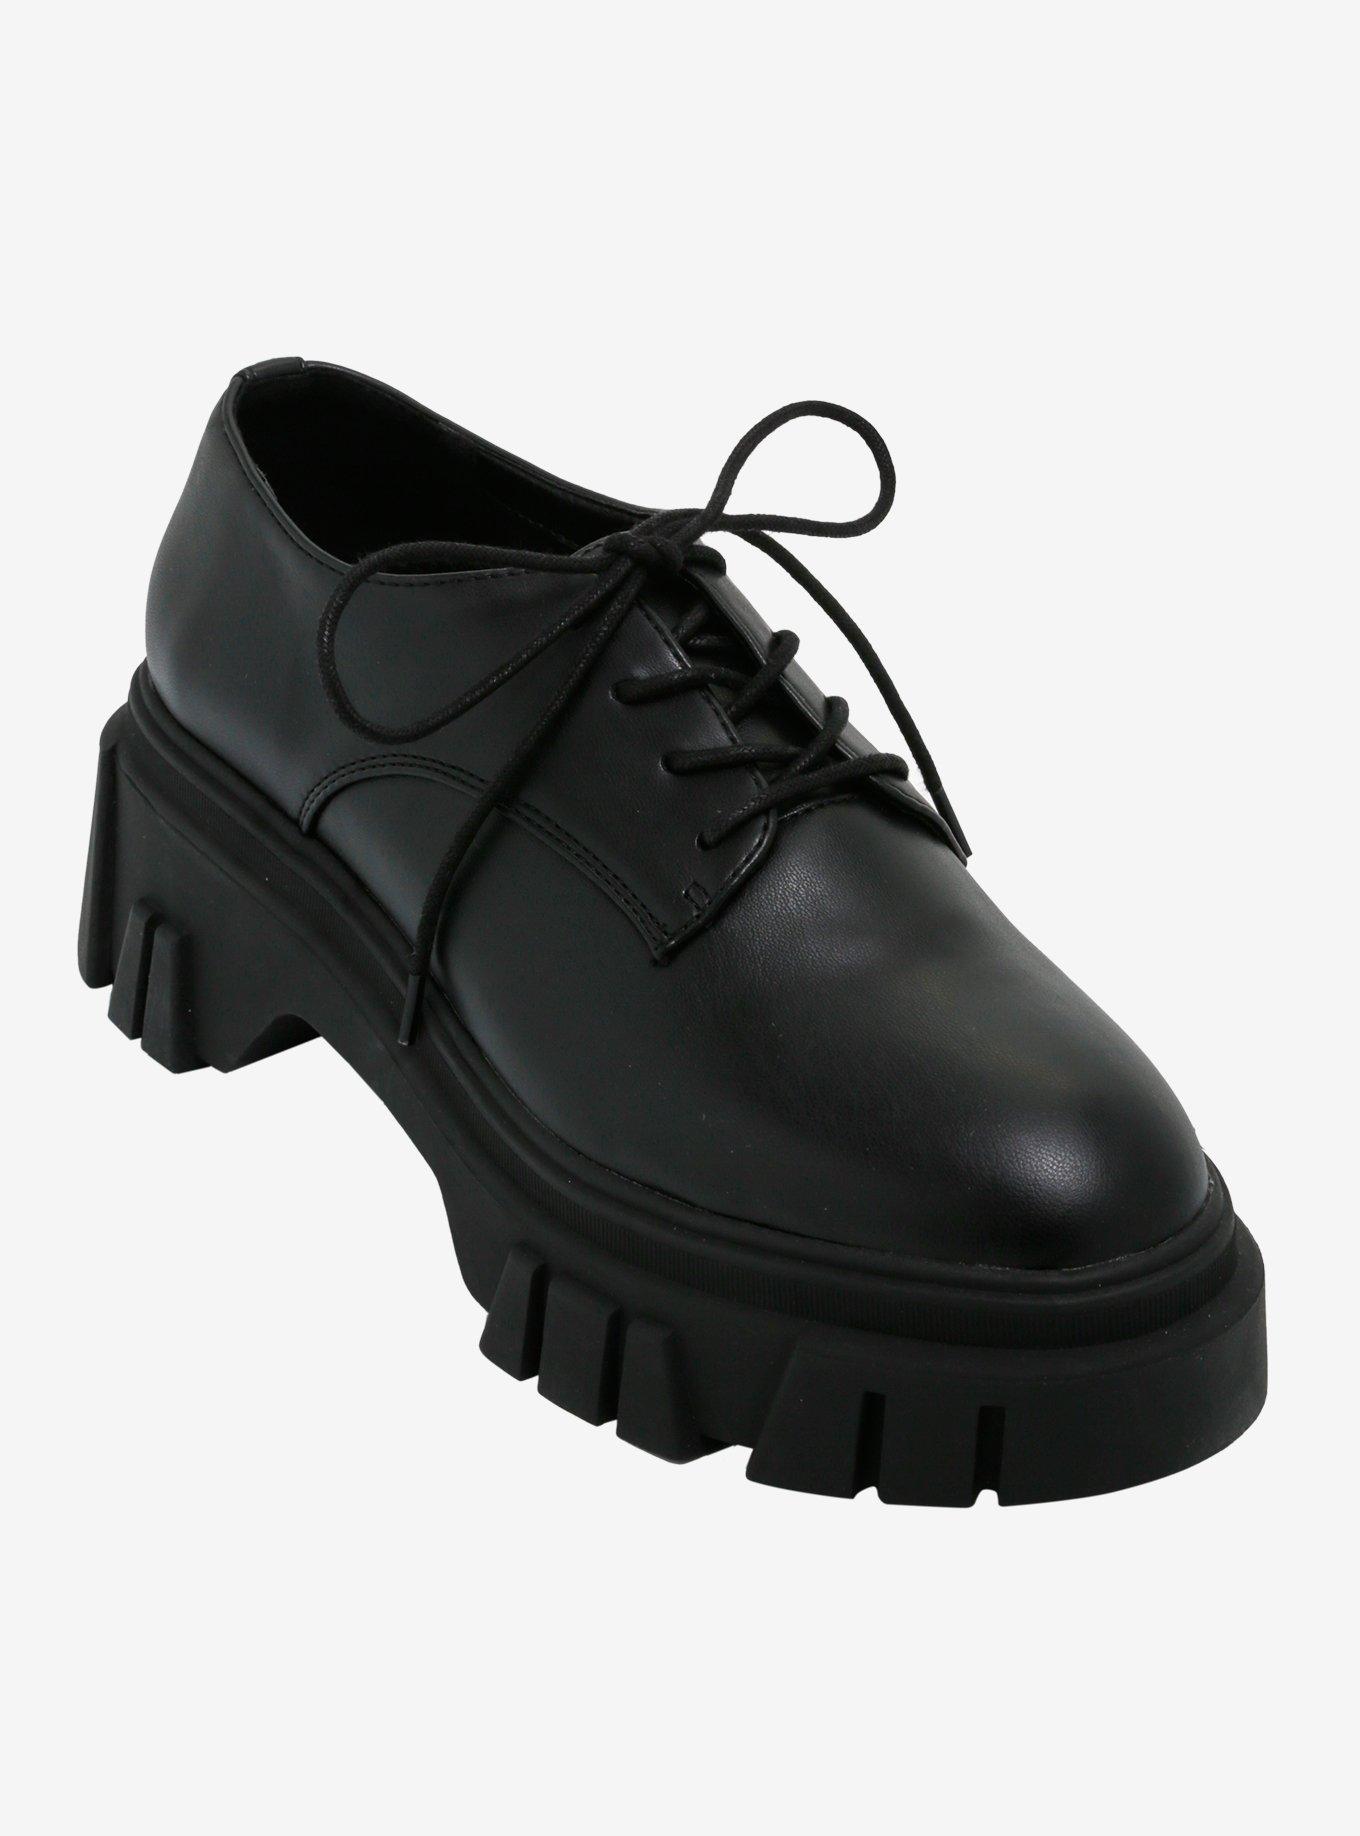 Chinese Laundry Black Chunky Oxford Shoes, MULTI, hi-res